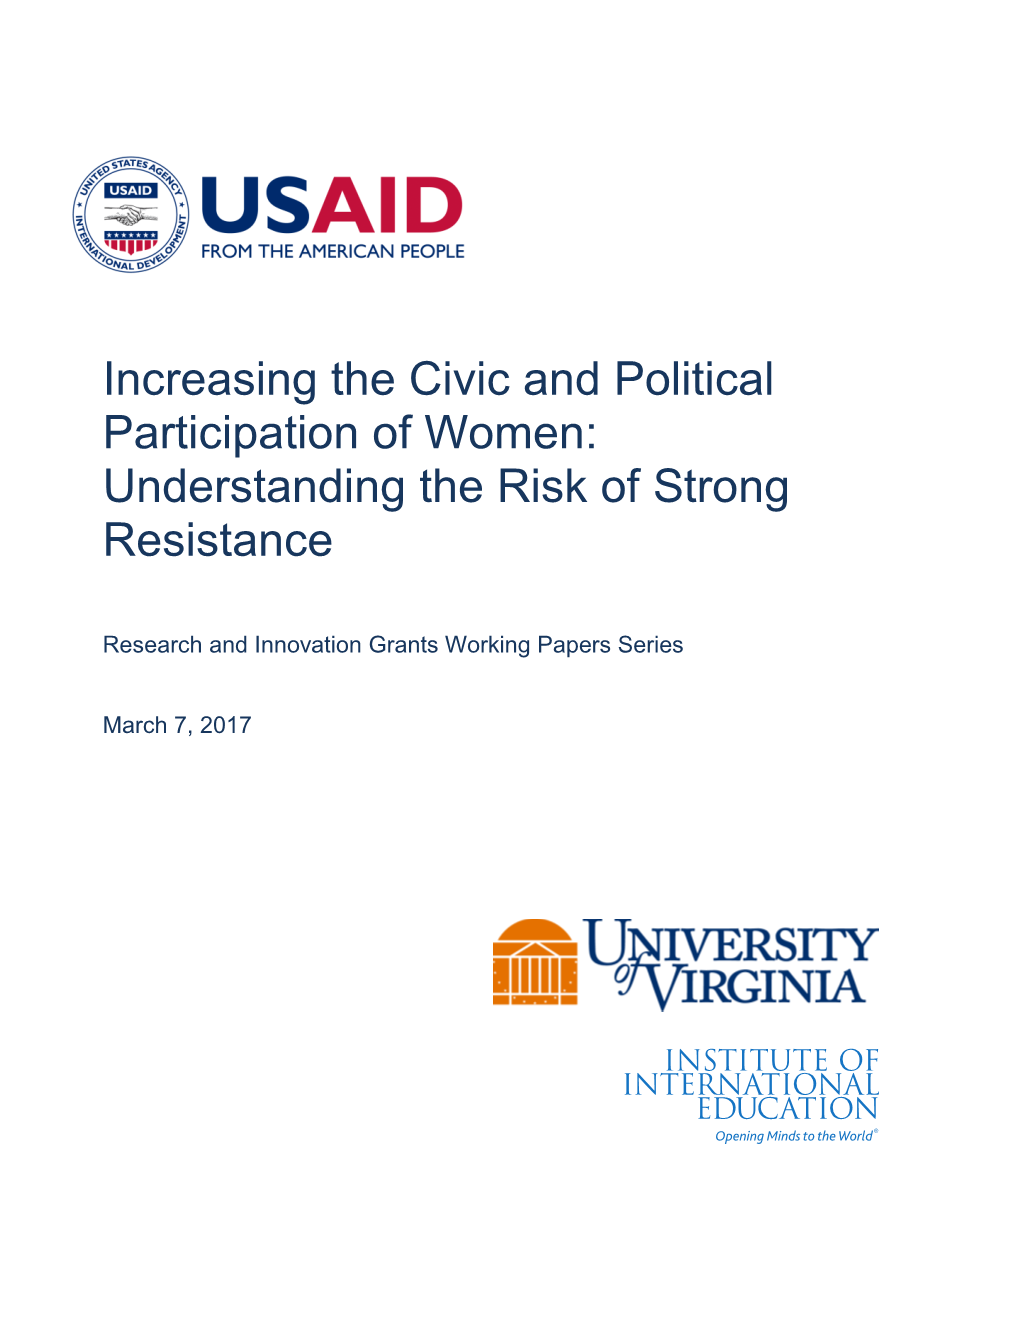 Increasing the Civic and Political Participation of Women: Understanding the Risk of Strong Resistance